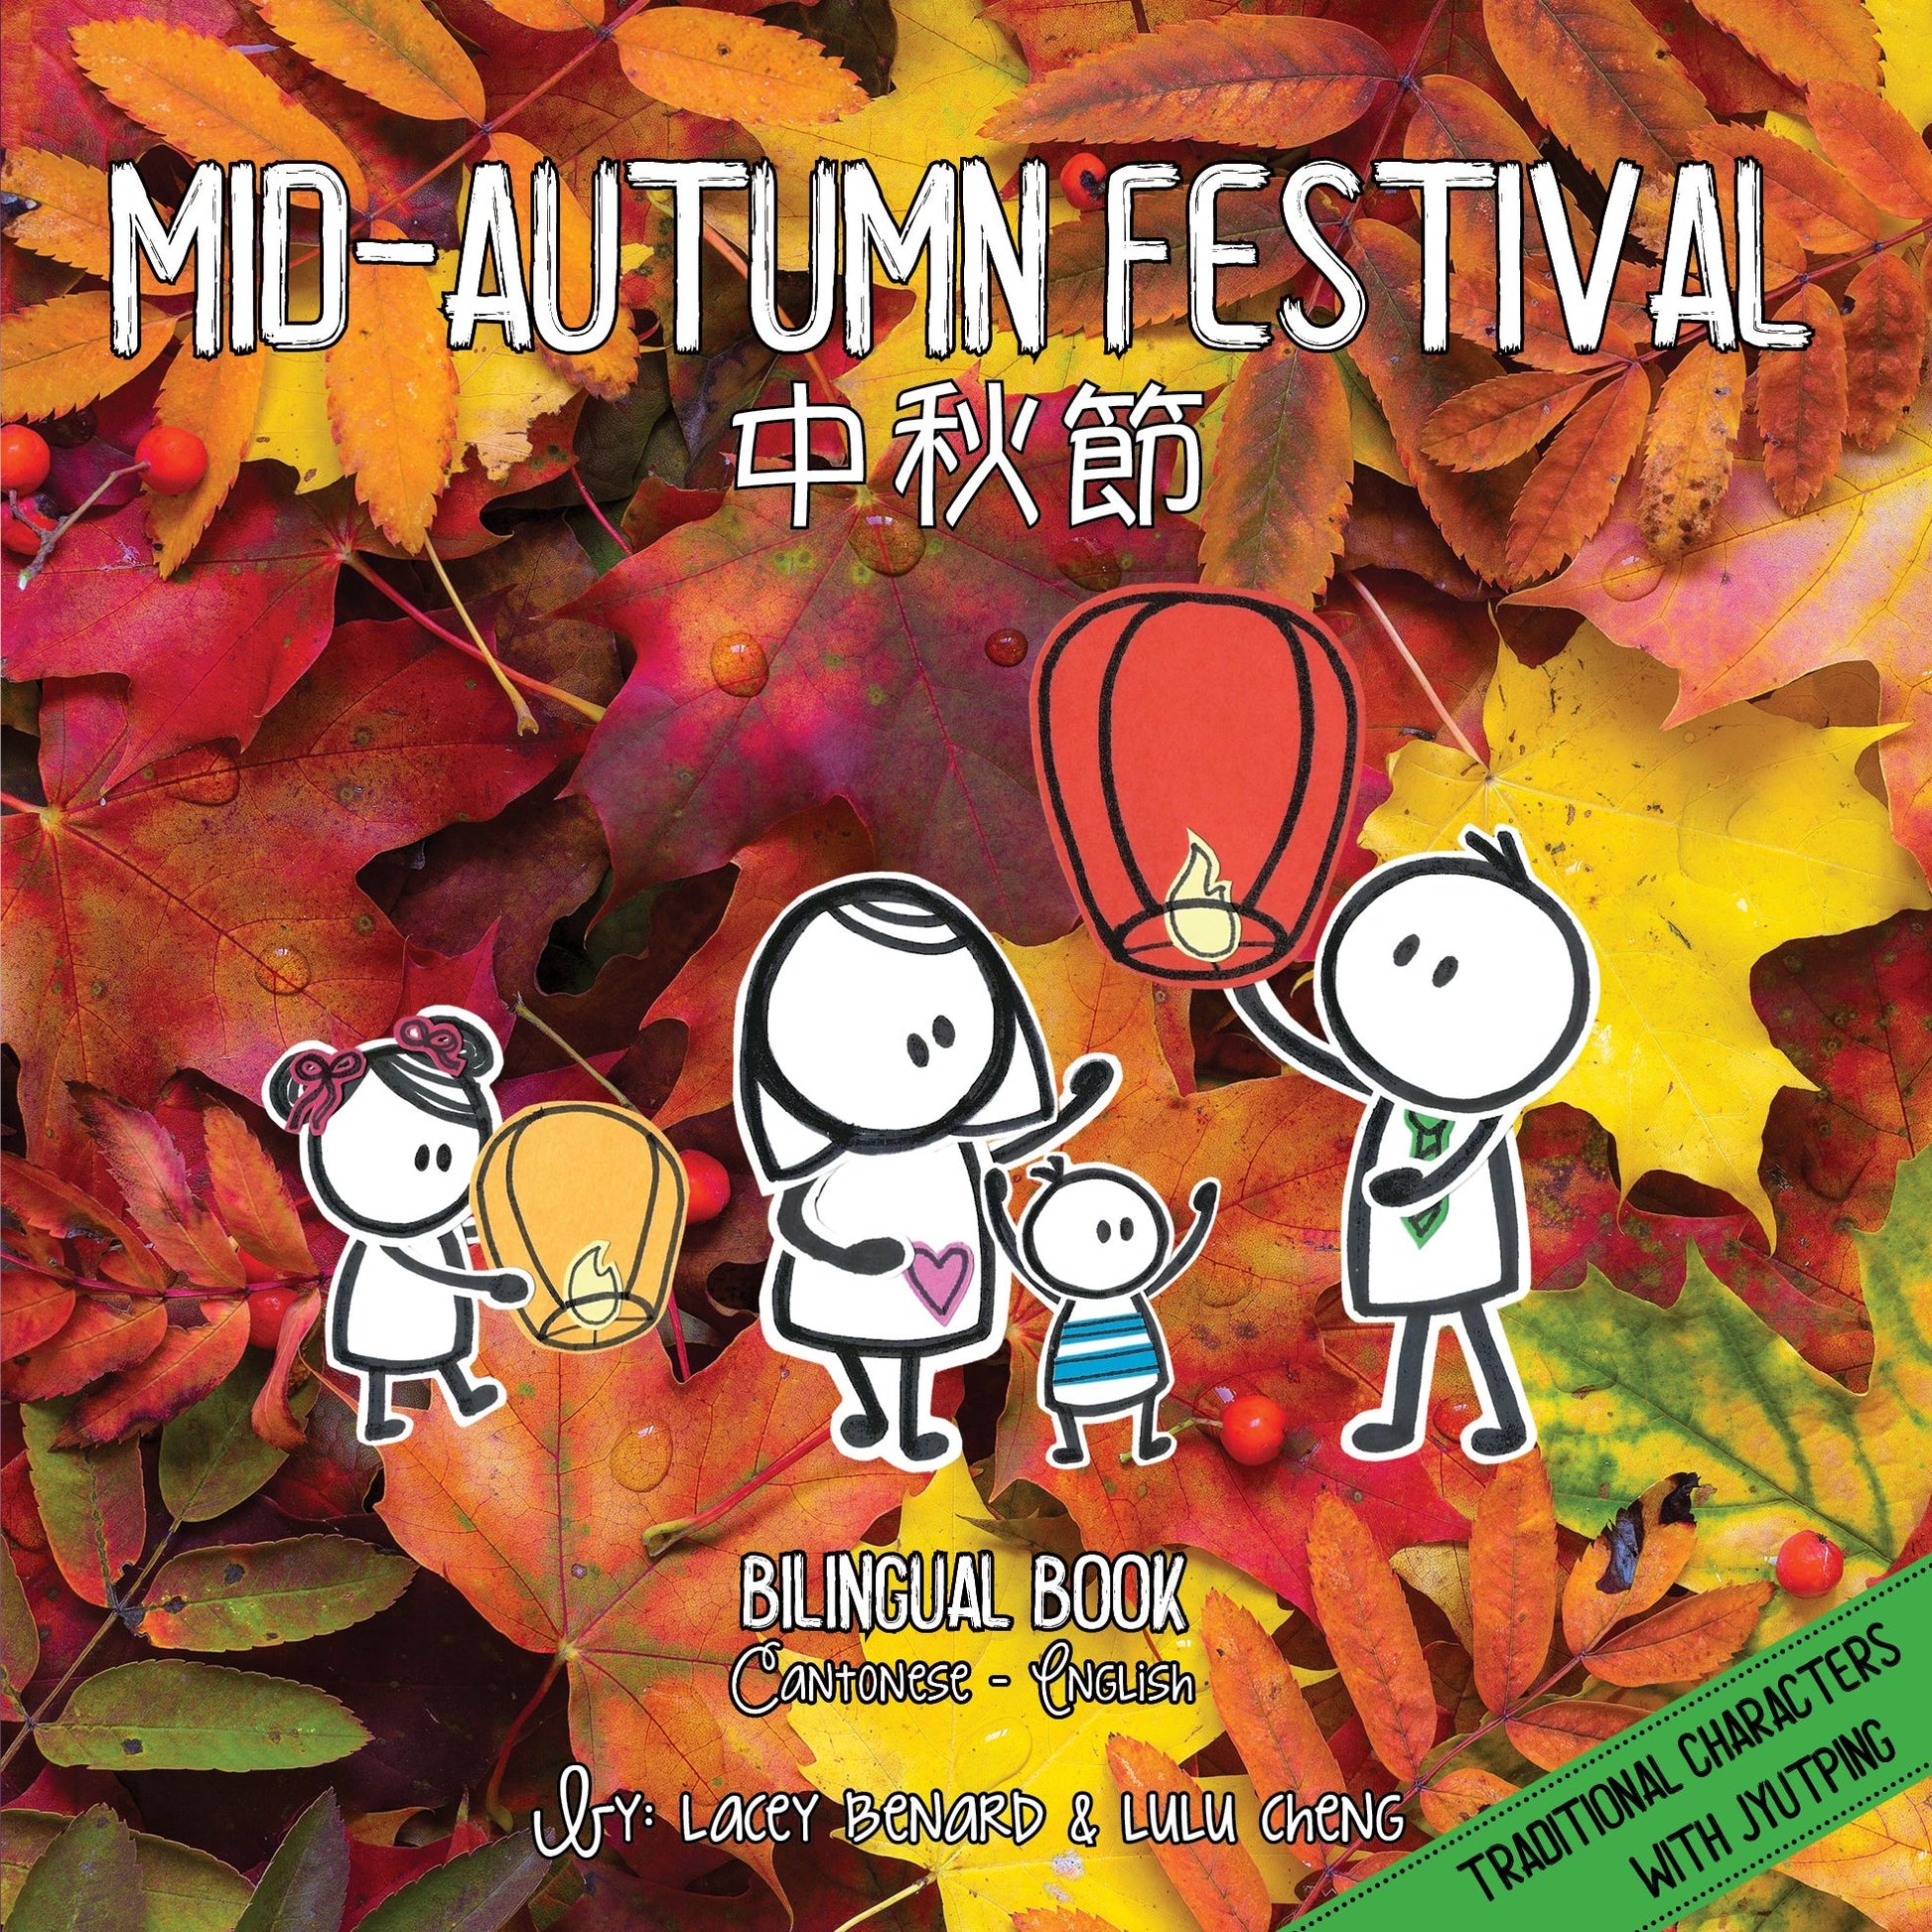 Mid-Autumn Festival 中秋節, is a bilingual board book from the Bitty Bao Cantonese series, by Lacey Benard and Lulu Cheng, written in traditional Chinese, with Cantonese text and jyutping.